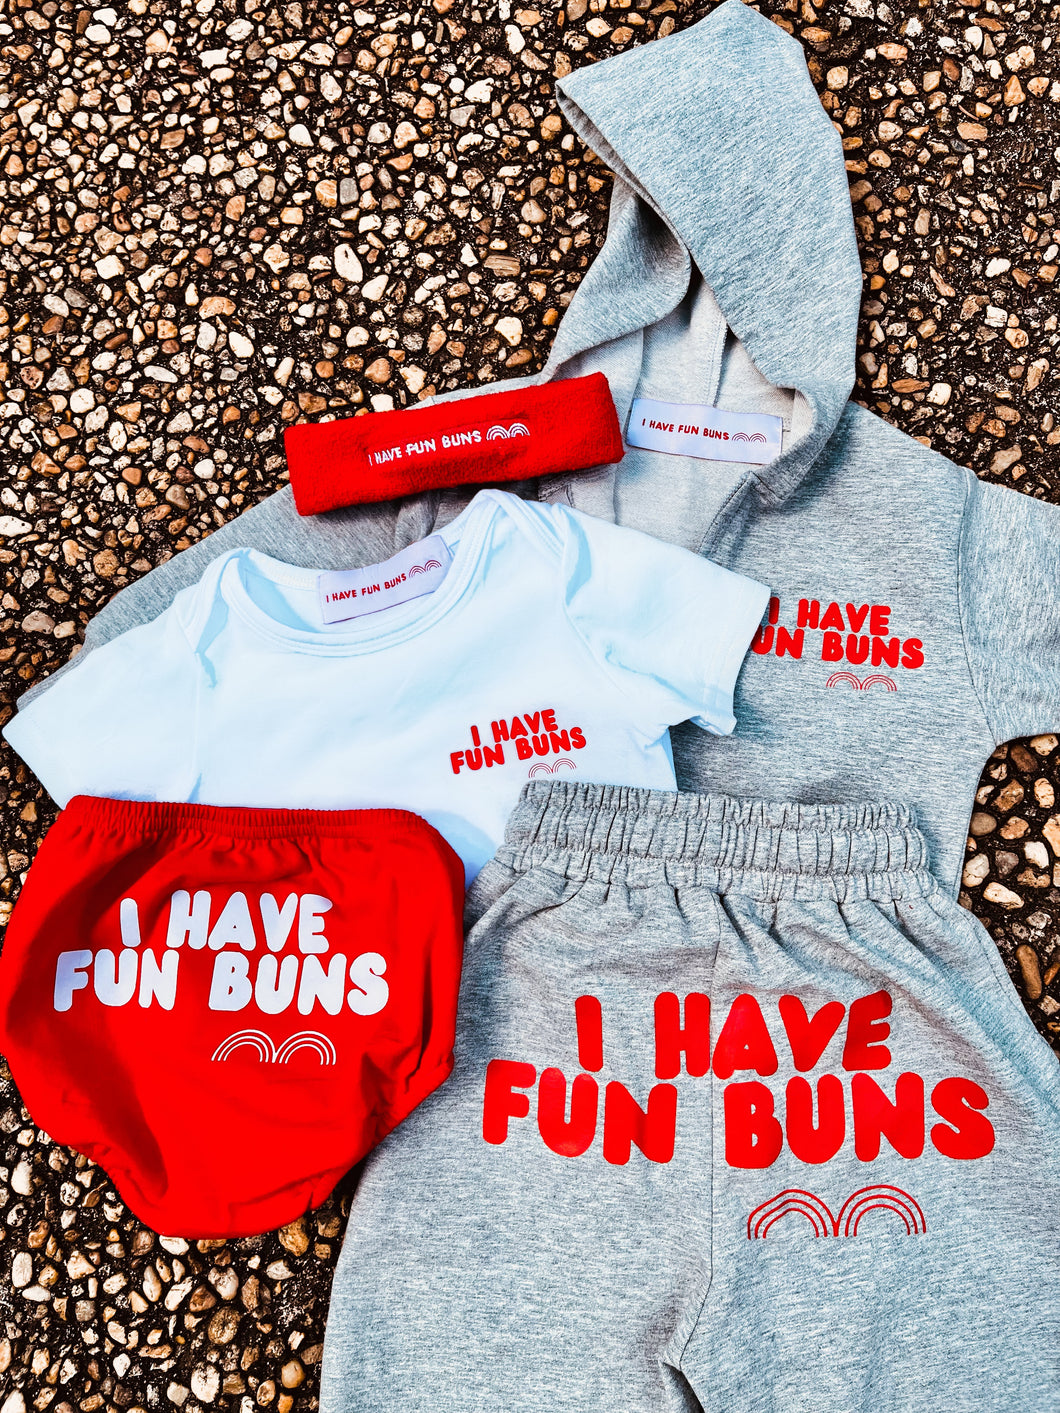 Cotton Baby and Toddler Outfit “I HAVE FUN BUNS” The Complete Package